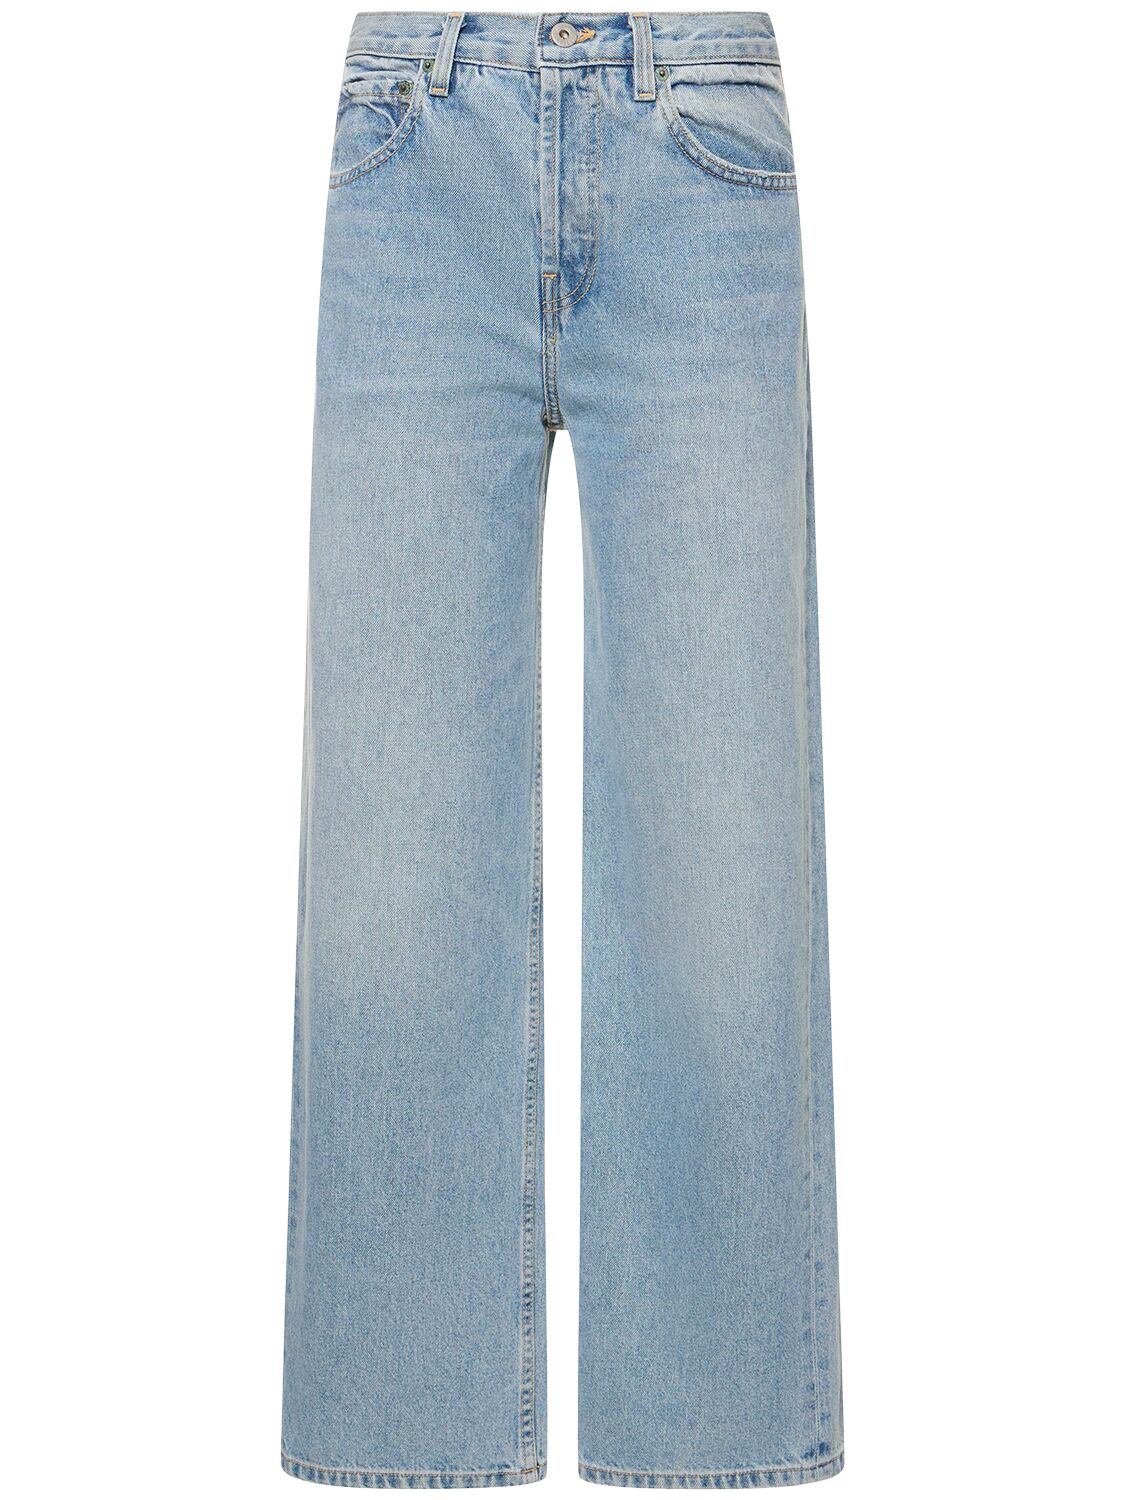 Image of The Remy Cotton Denim Jeans